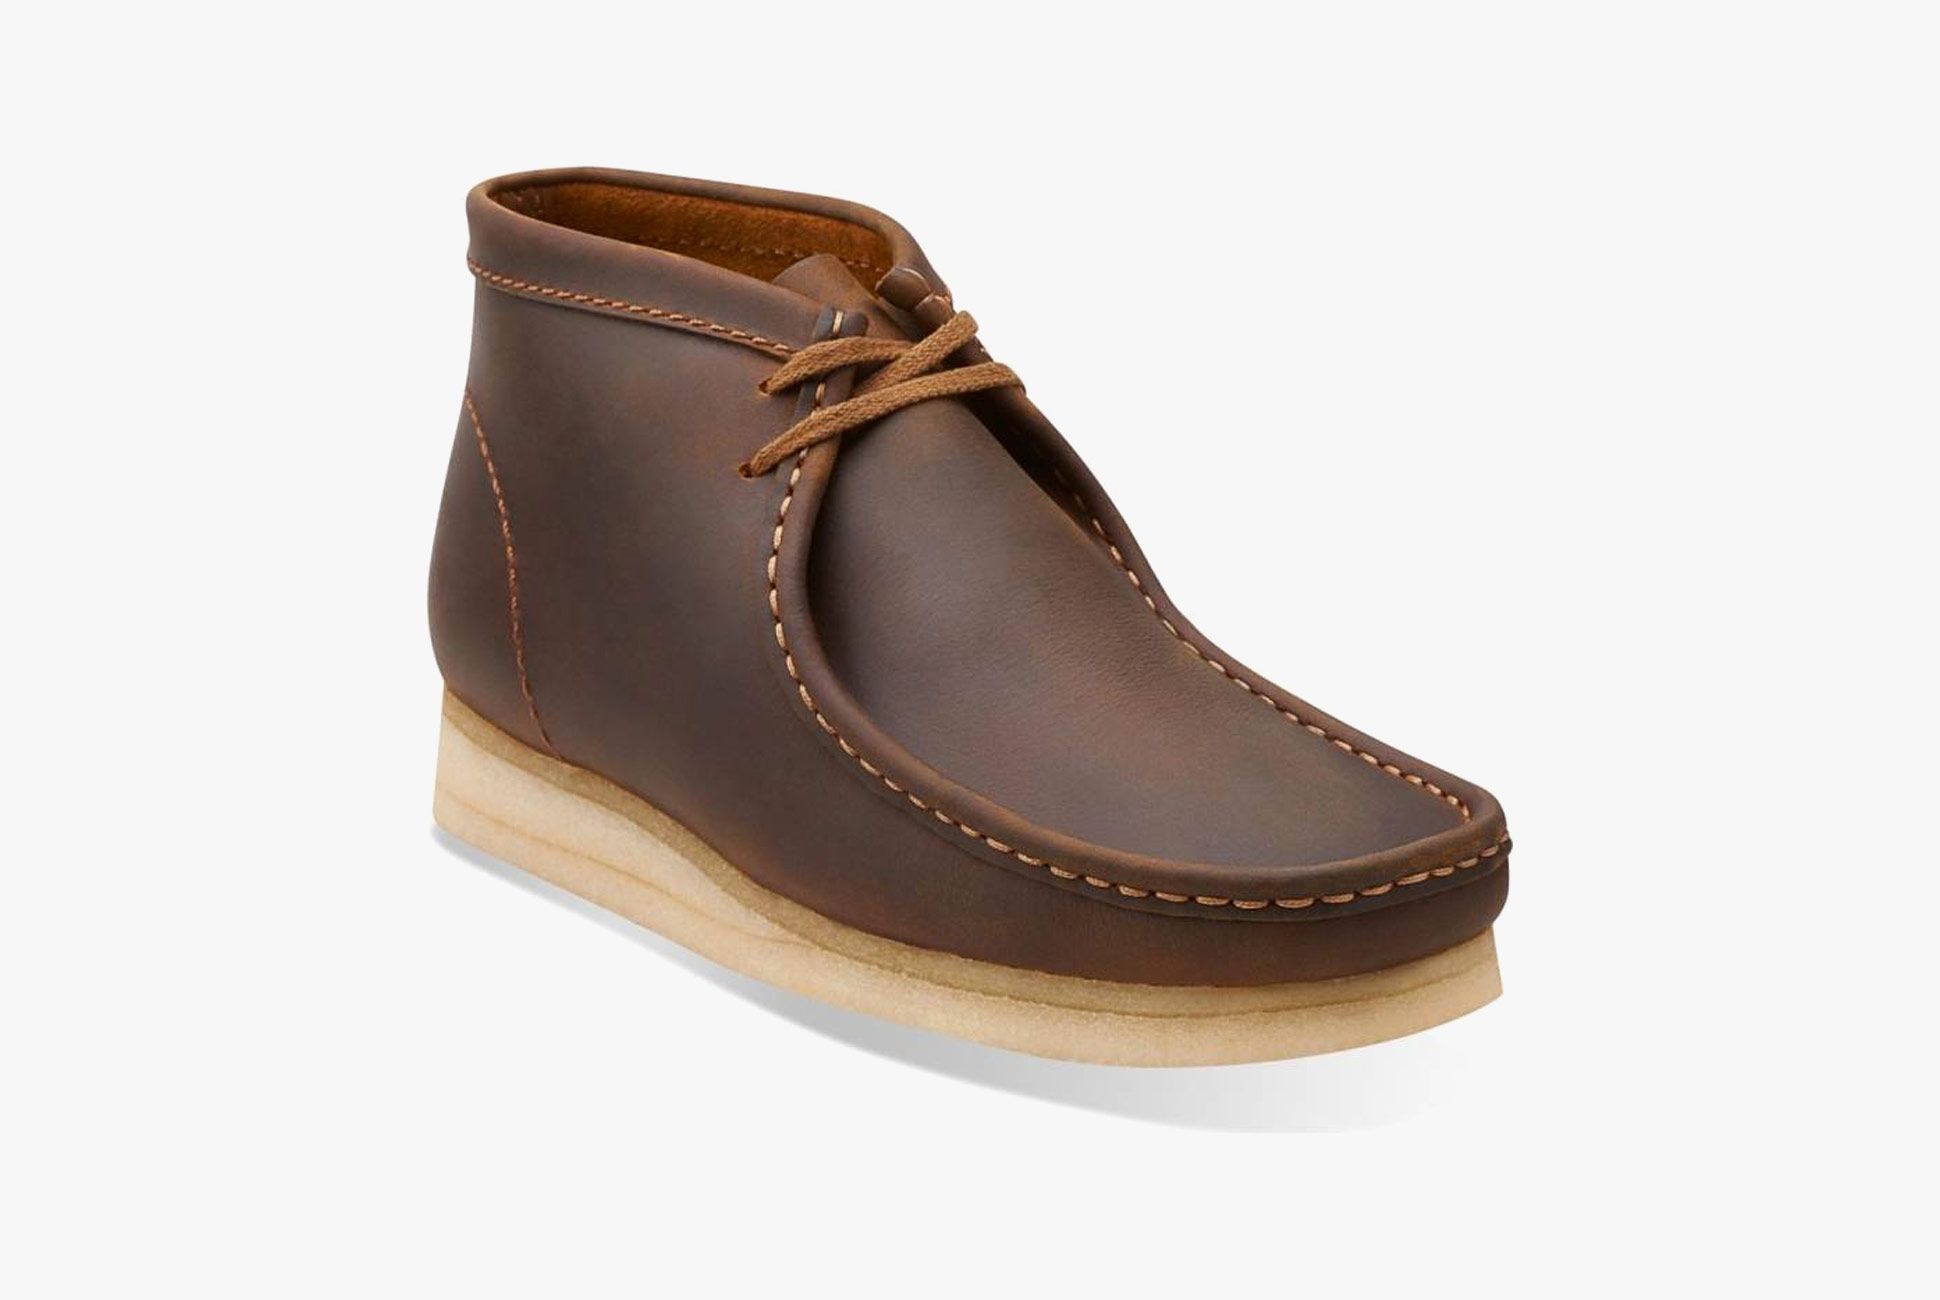 wallabee boots sale